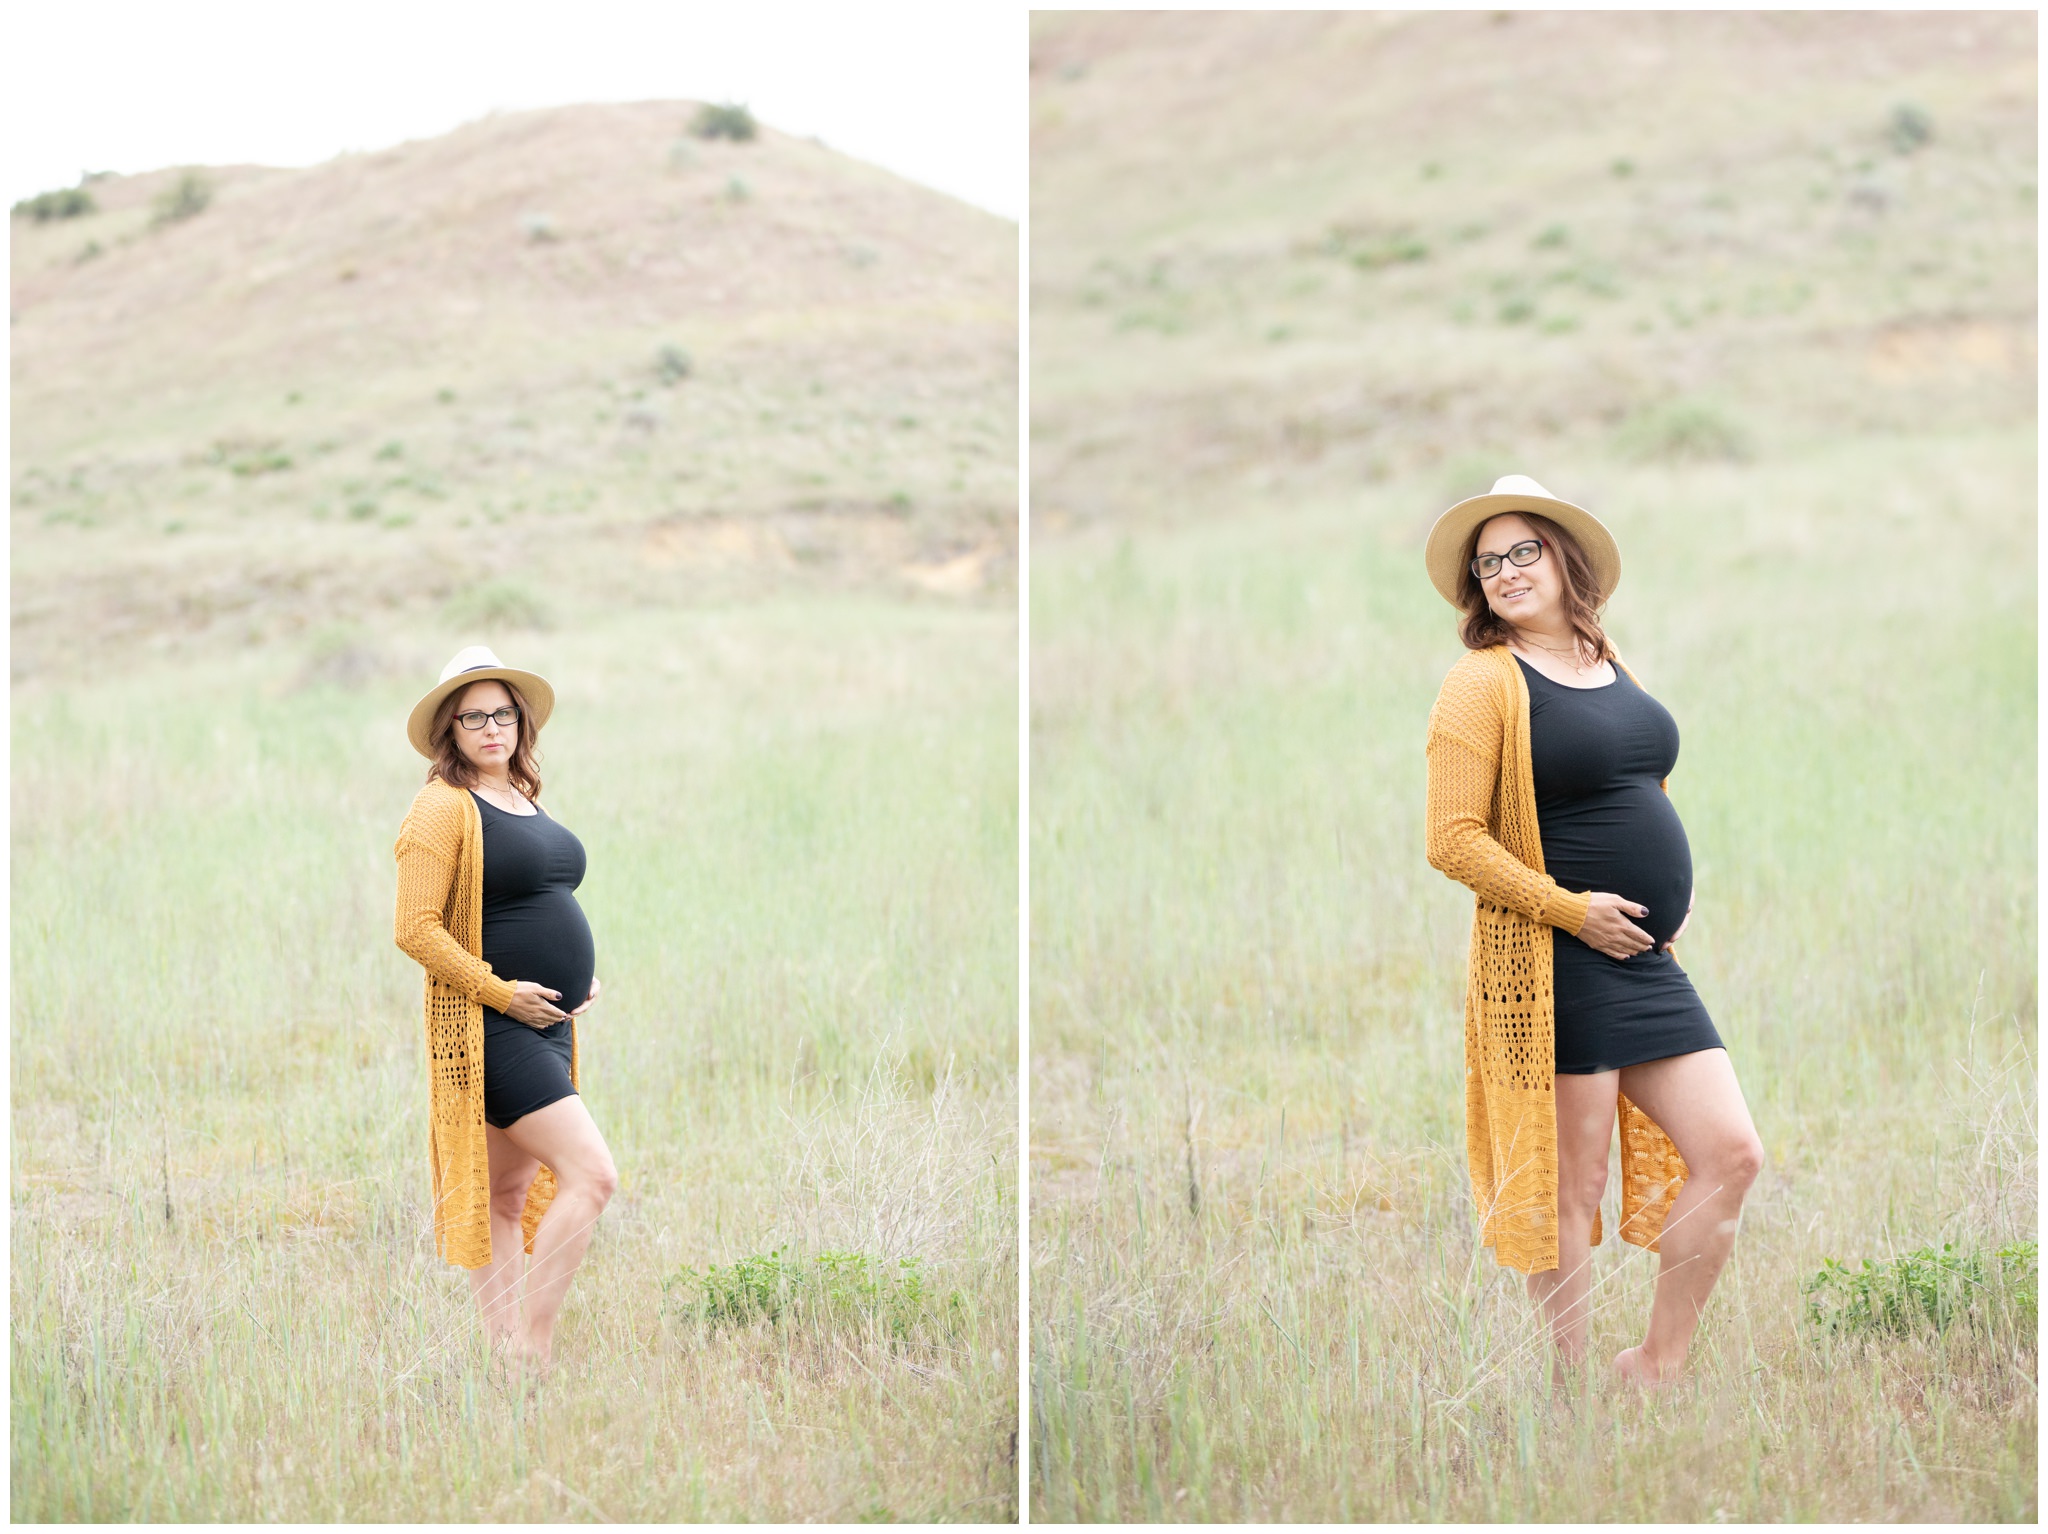 Maternity Pictures taken in Boise Idaho foothills